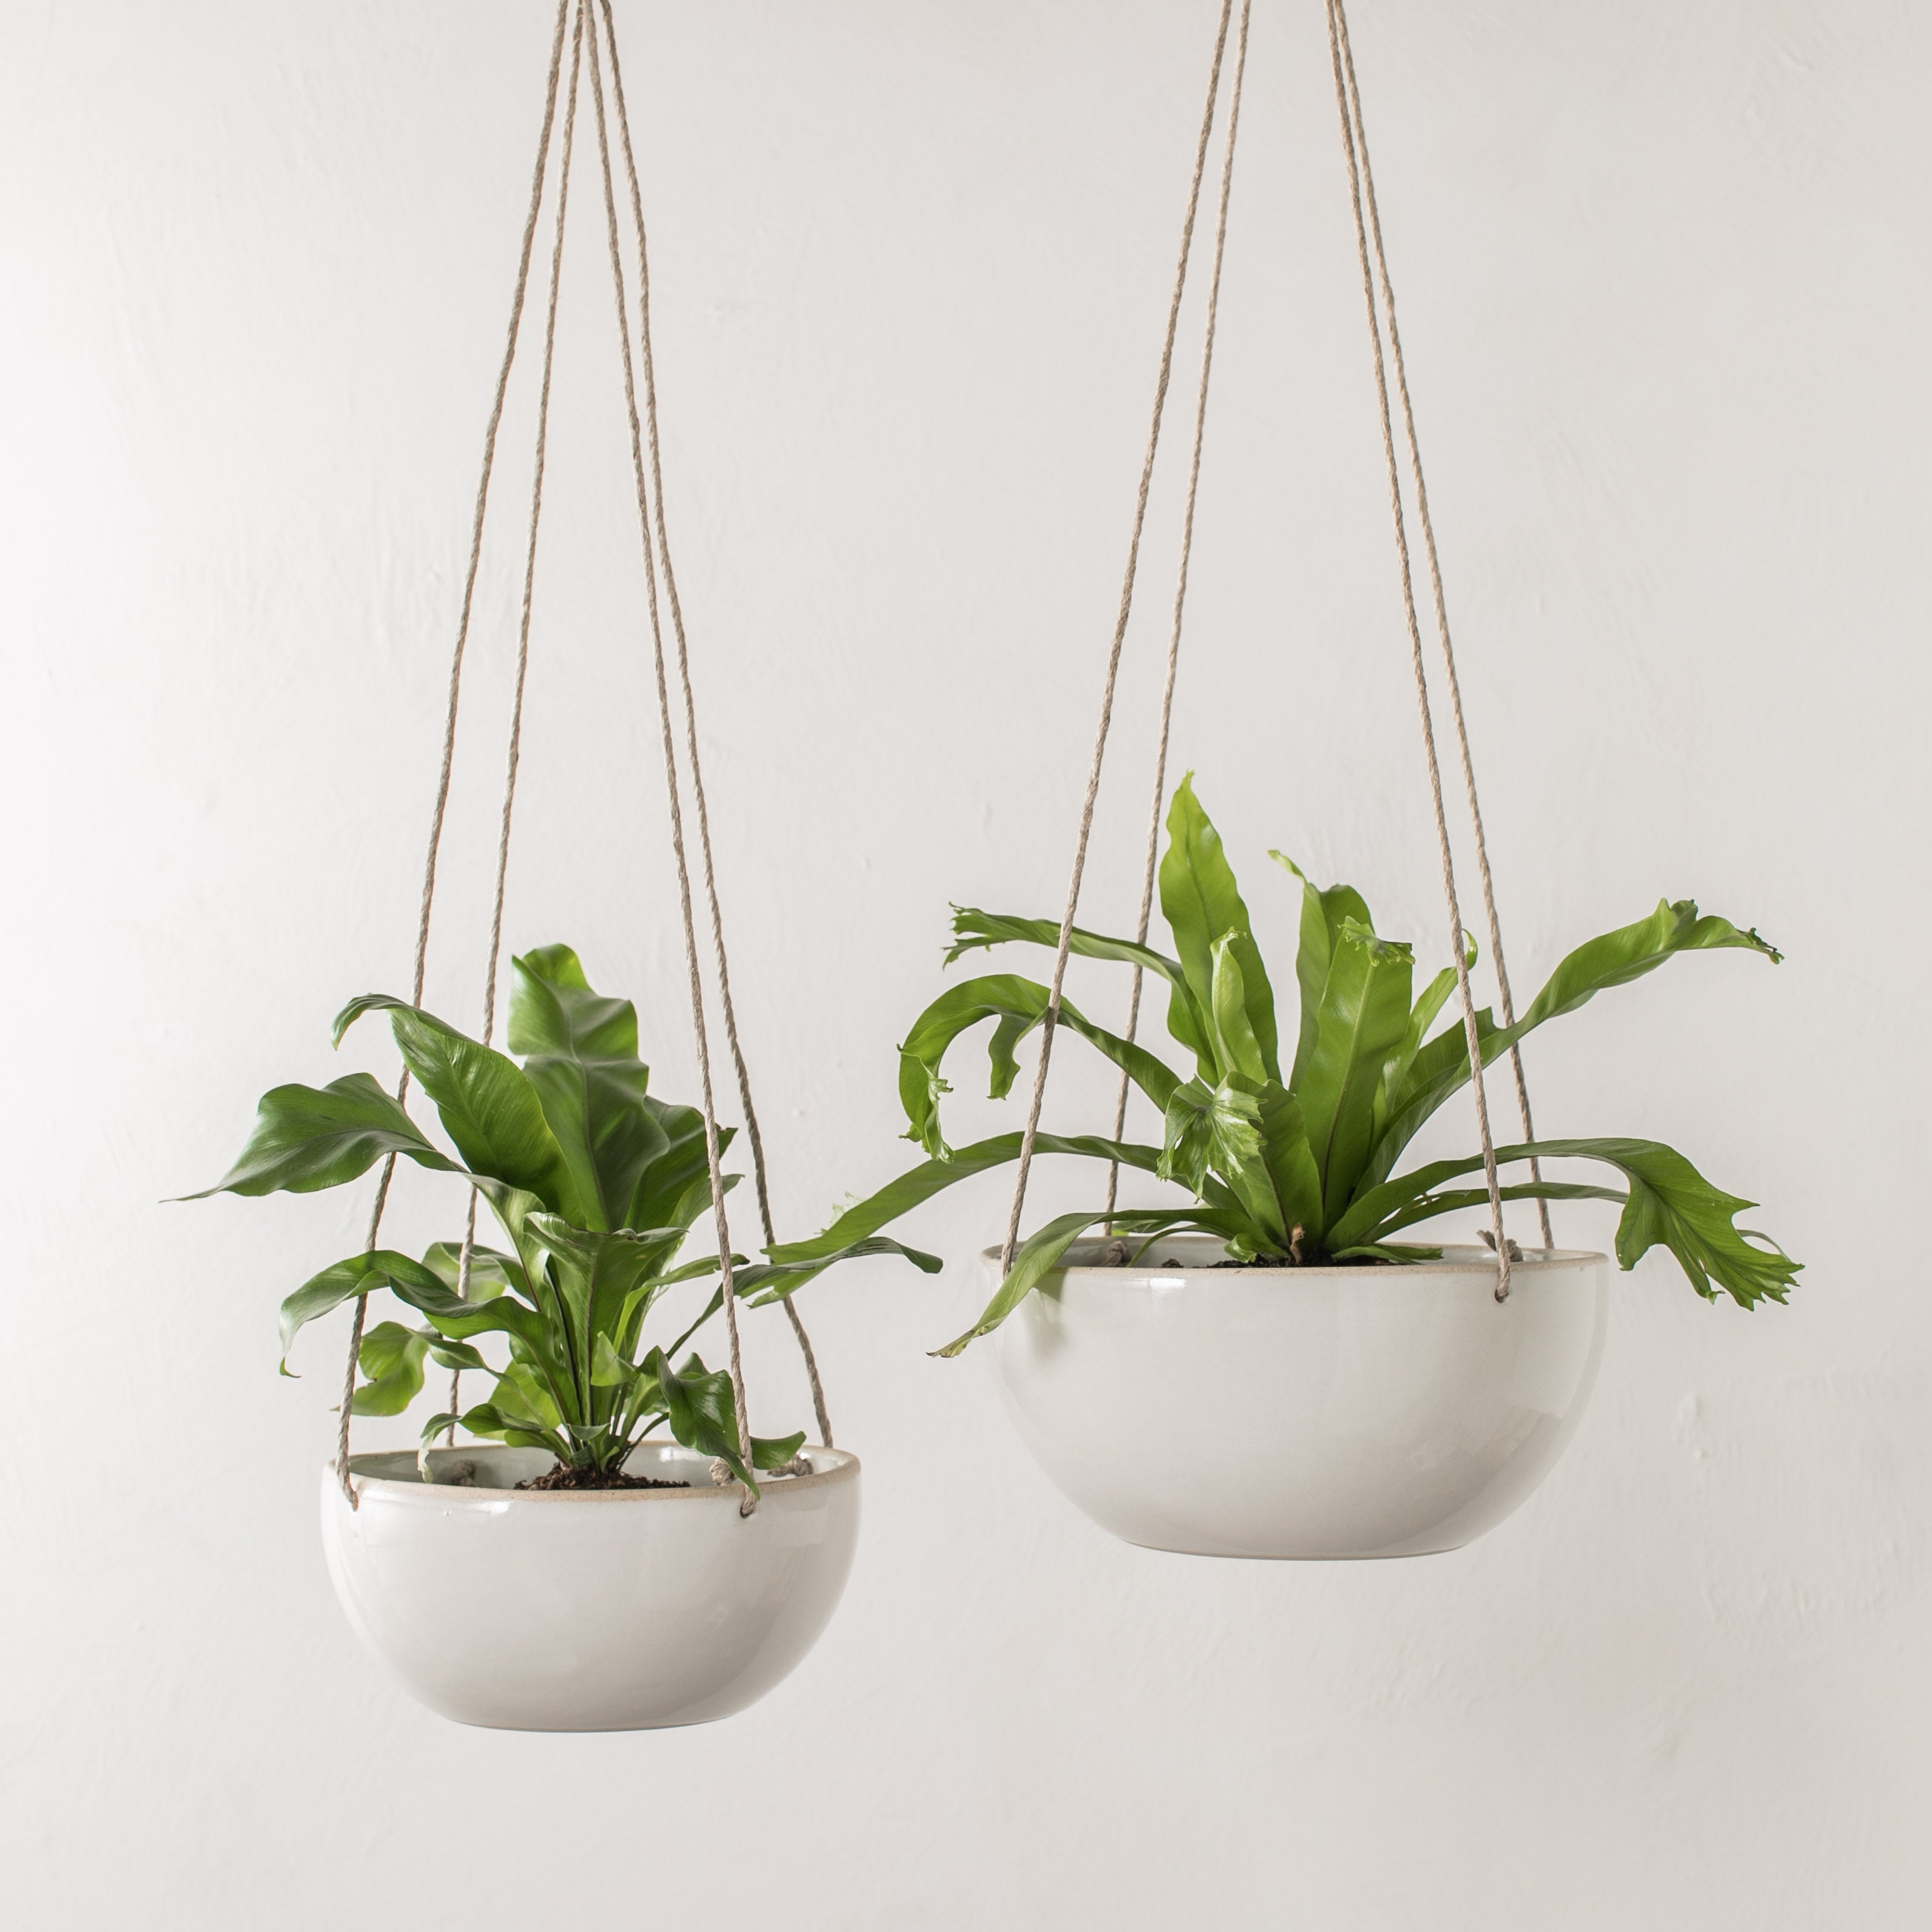 Two minimal ceramic hanging planter. Planters have an exposed stoneware rim and base. From left to right, 4 inch plater with a plant hangs by a tan hemp cord next to a hanging 6 inch planter with a plant. Handmade ceramic hanging planter, designed and sold by Convivial Production, Kansas City ceramics. 